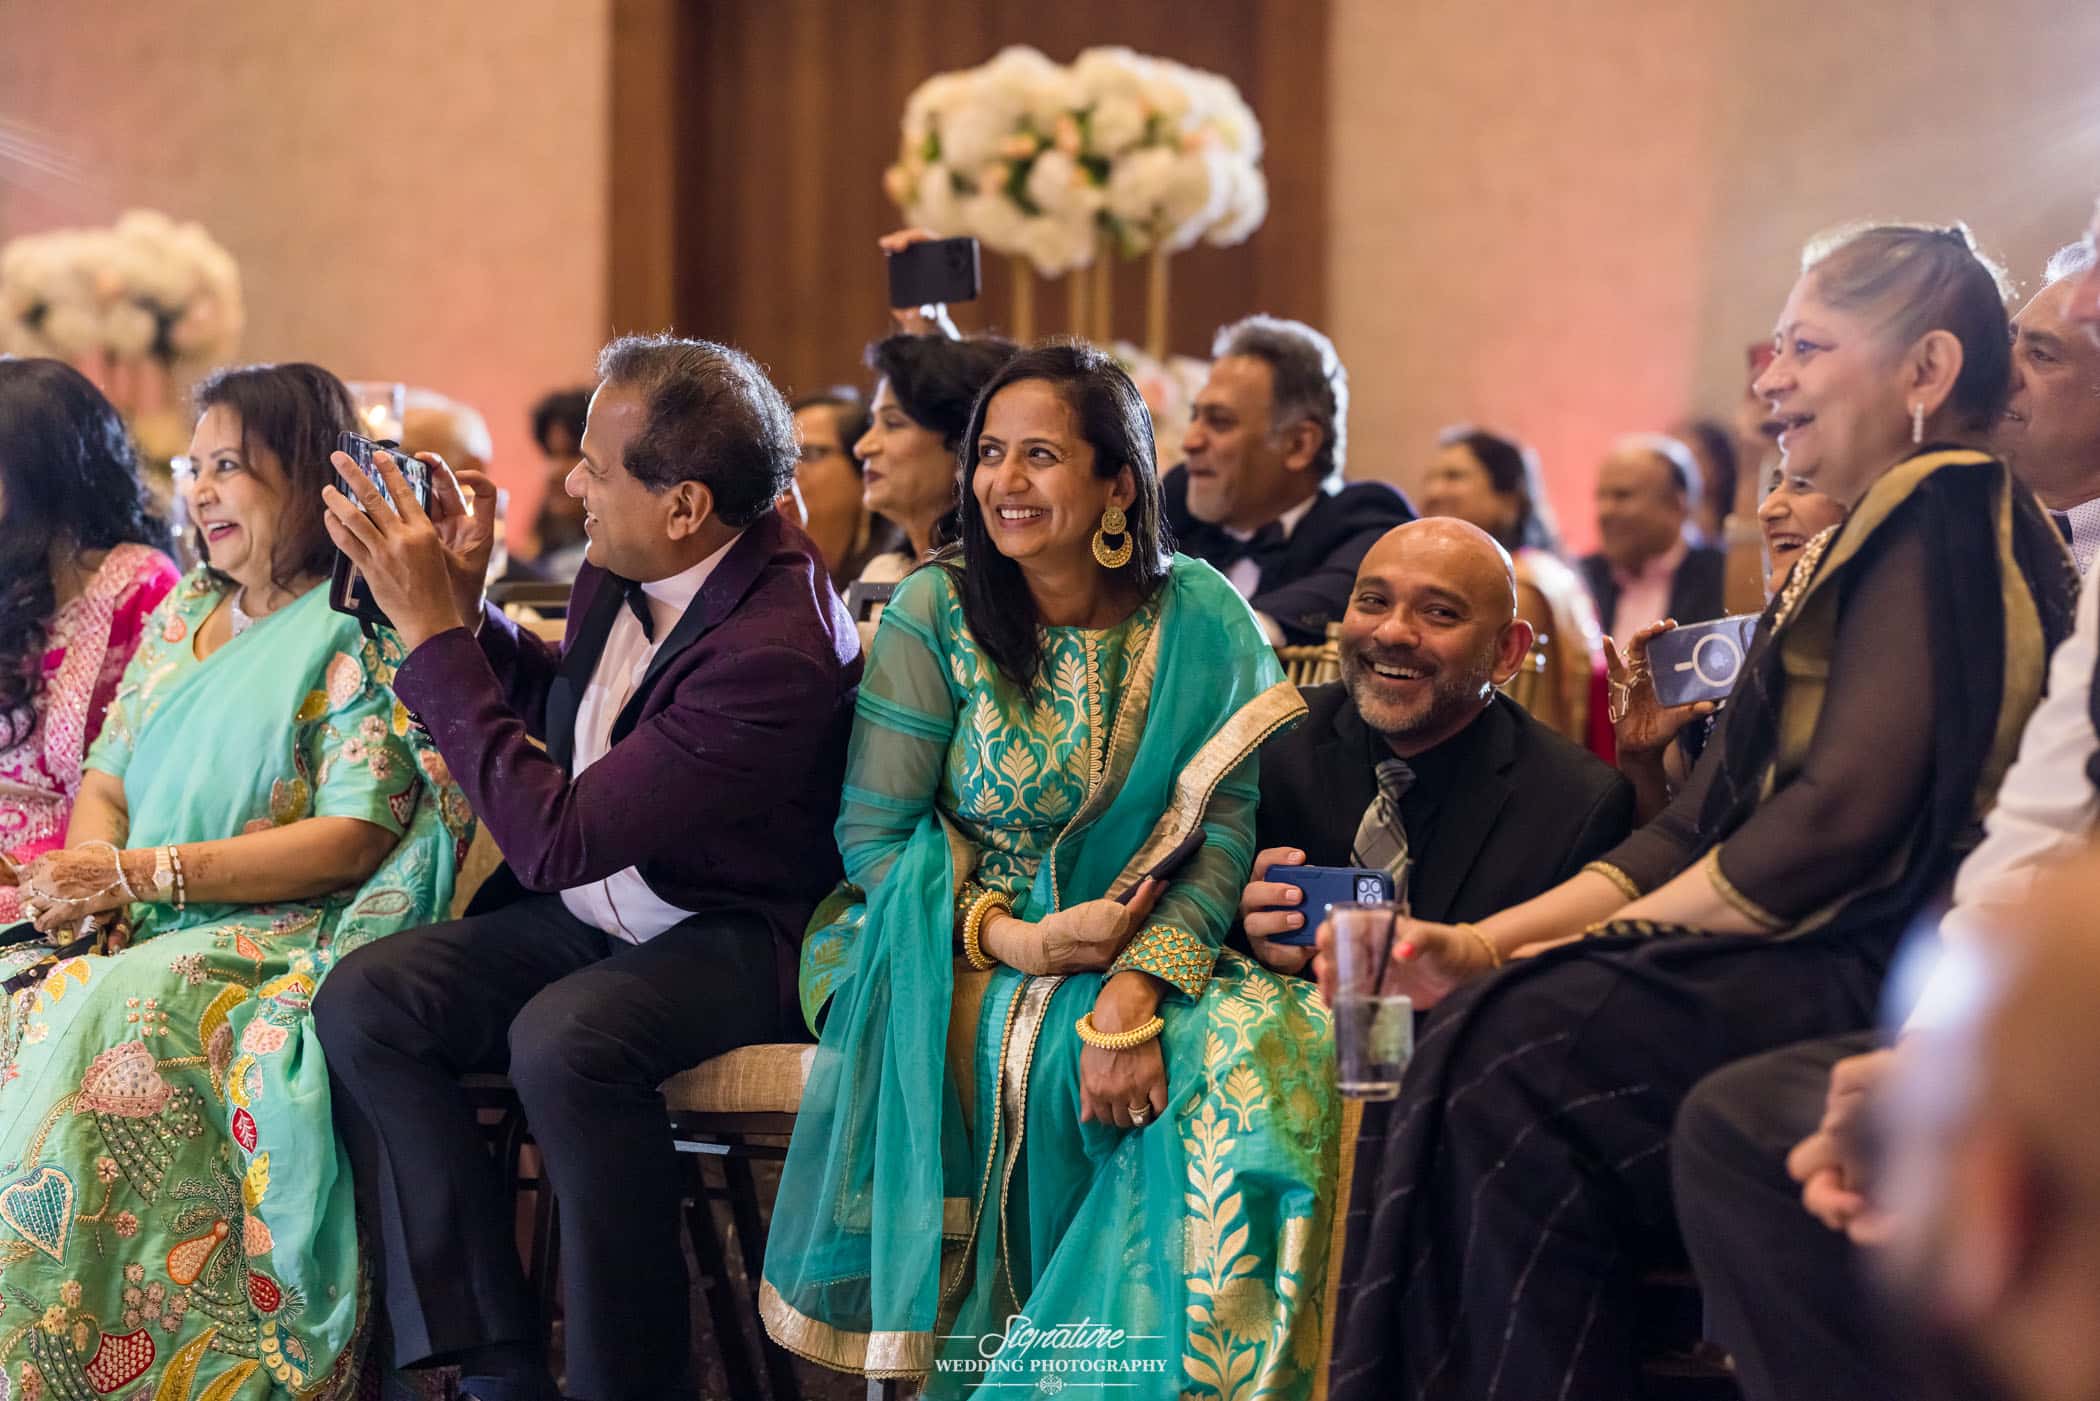 Wedding guests smiling during reception